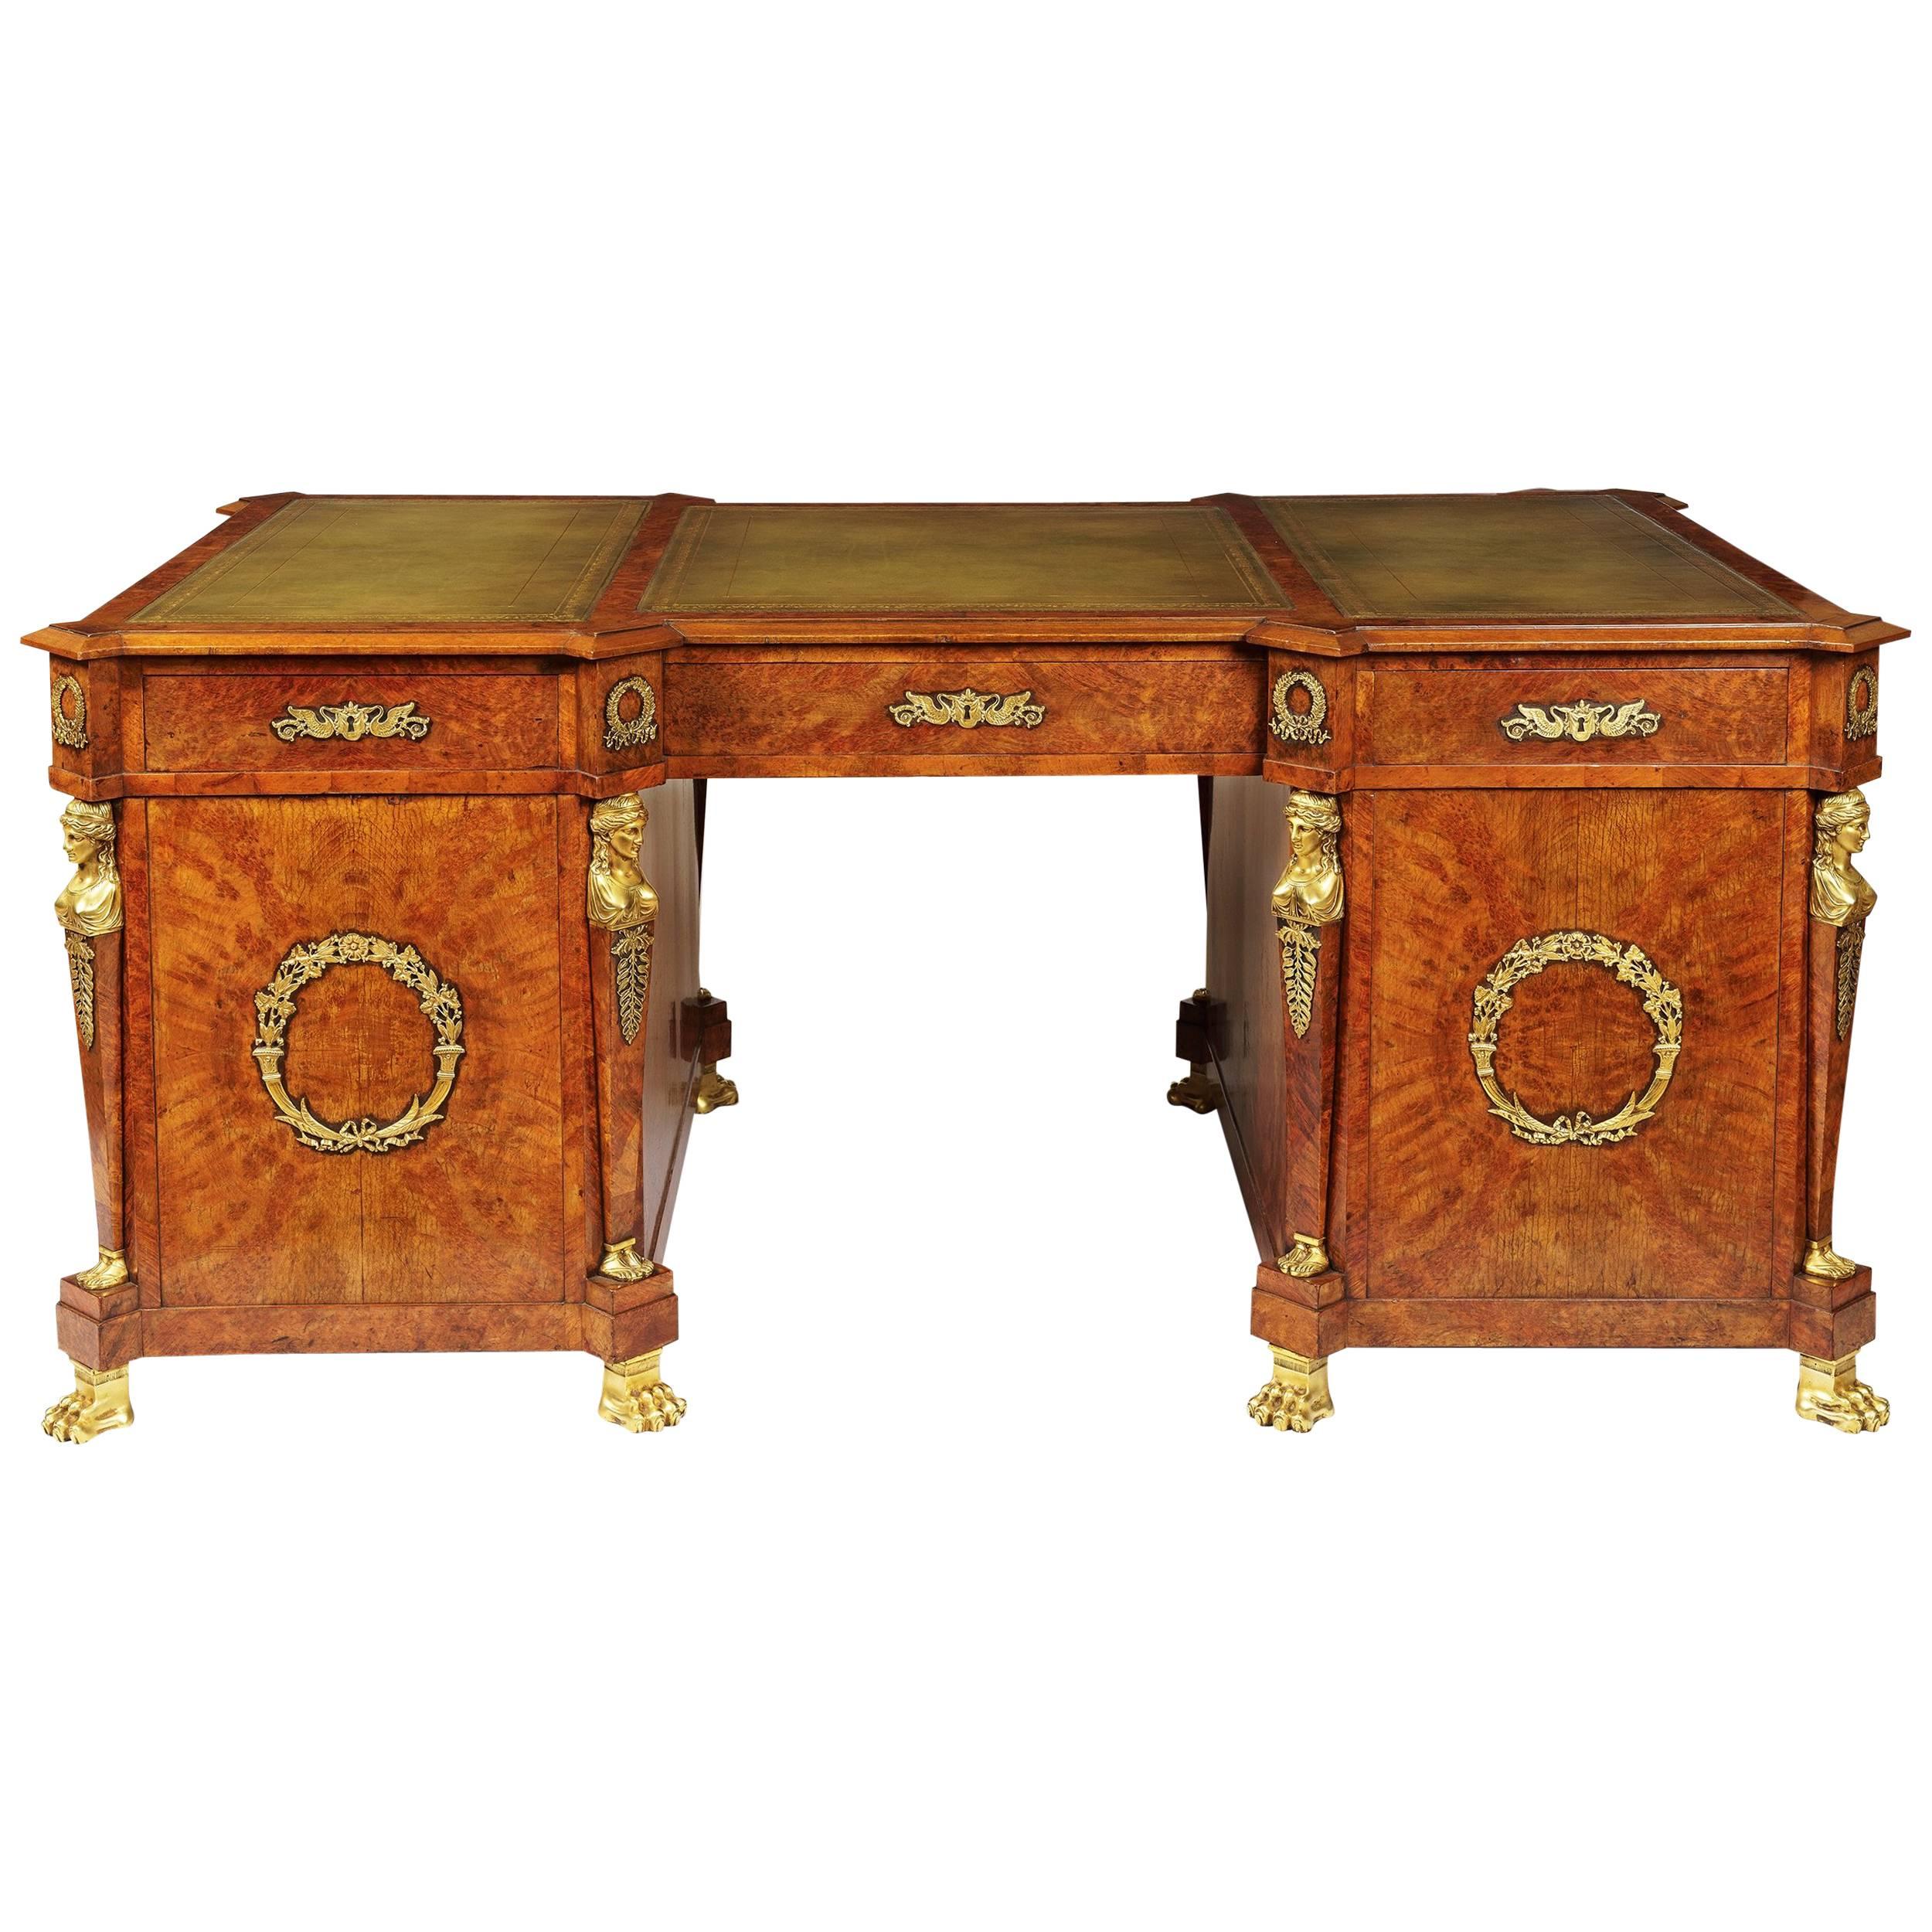 19th Century Birch and Morocco Leather Pedestal Desk in the French Empire Manner